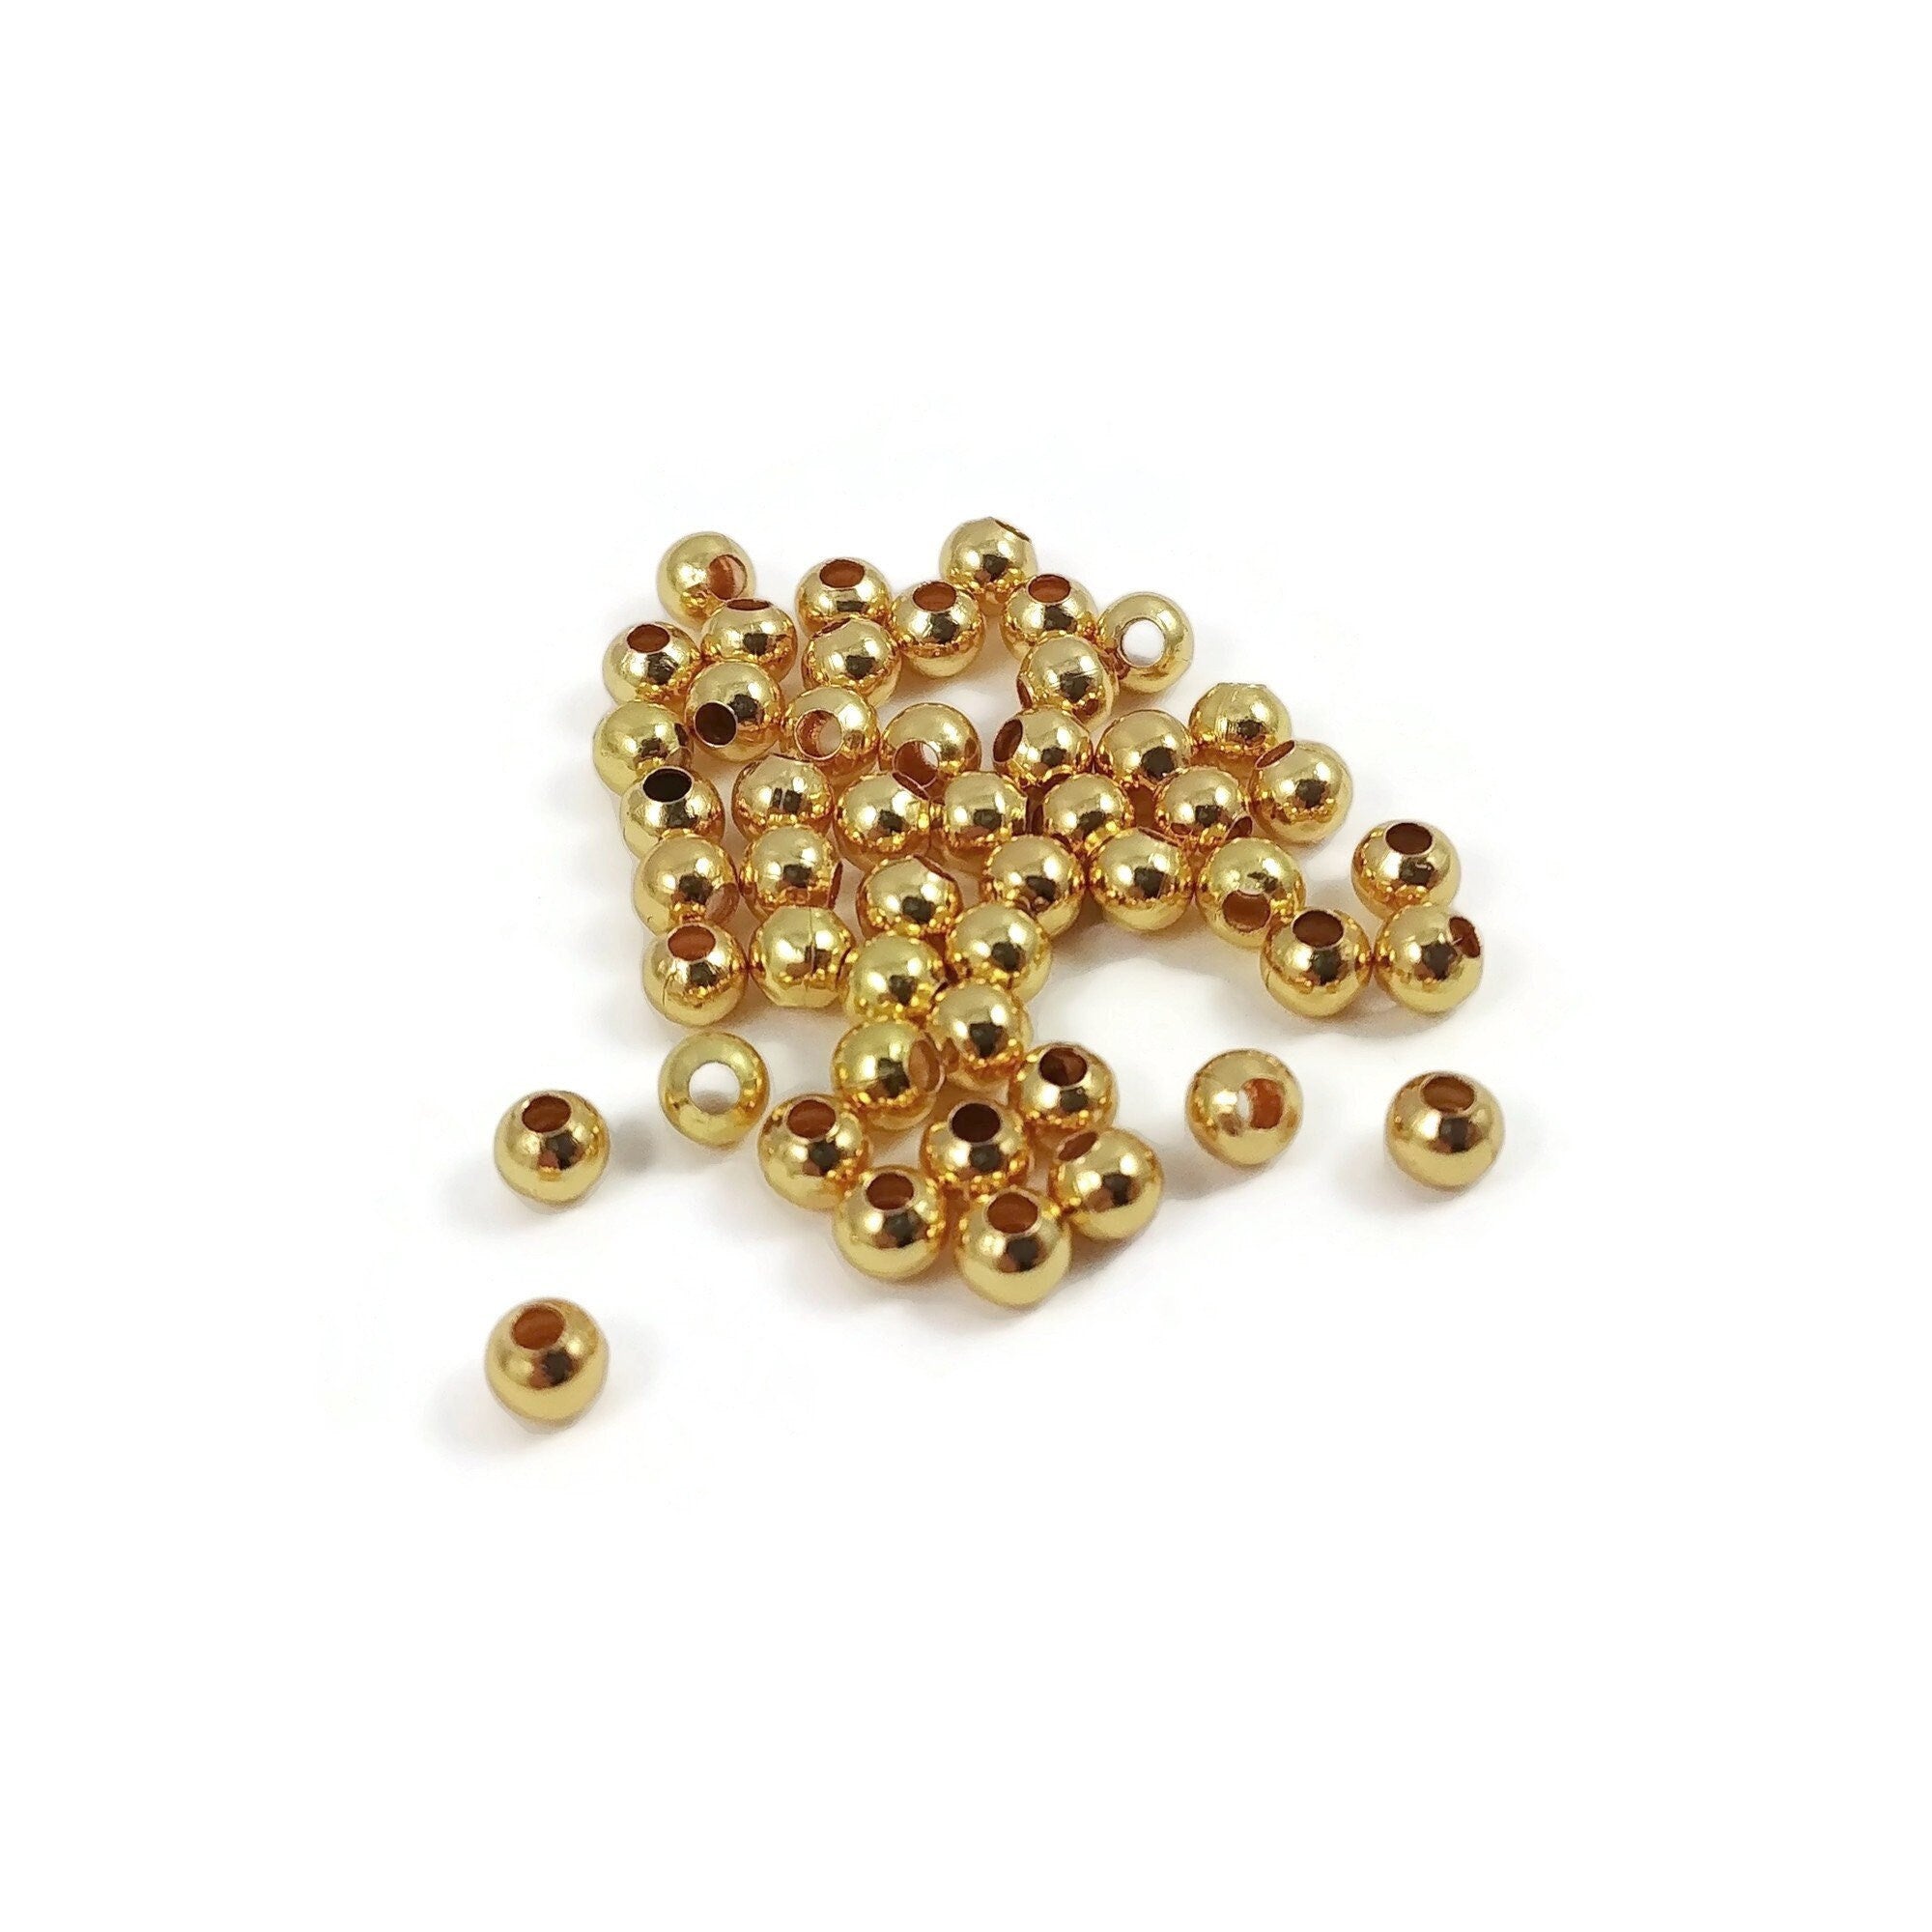 Gold Crustgold-tone Brass Rondelle Spacer Beads 5mm-8mm For Jewelry Making